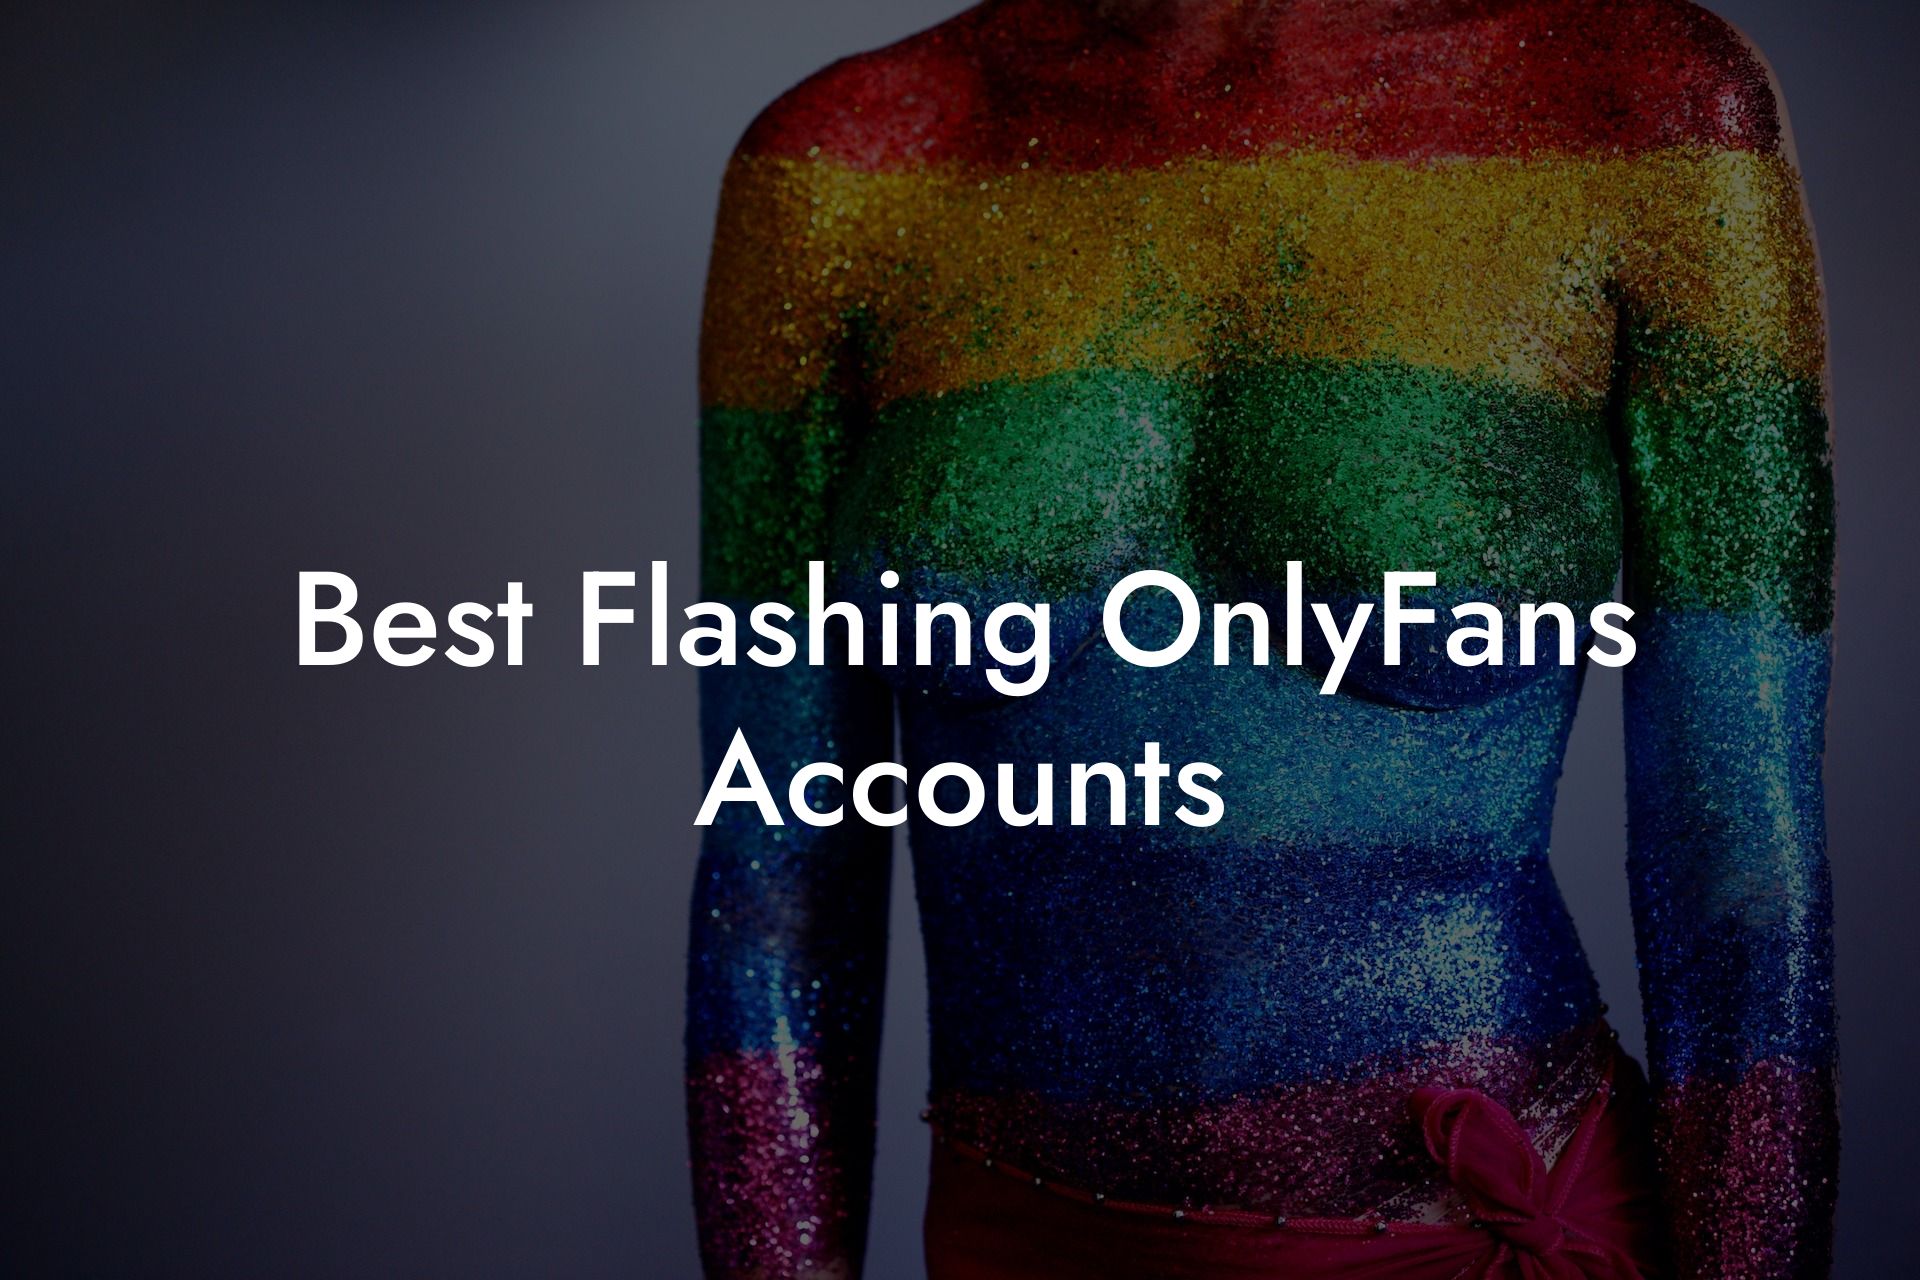 Best Flashing OnlyFans Accounts